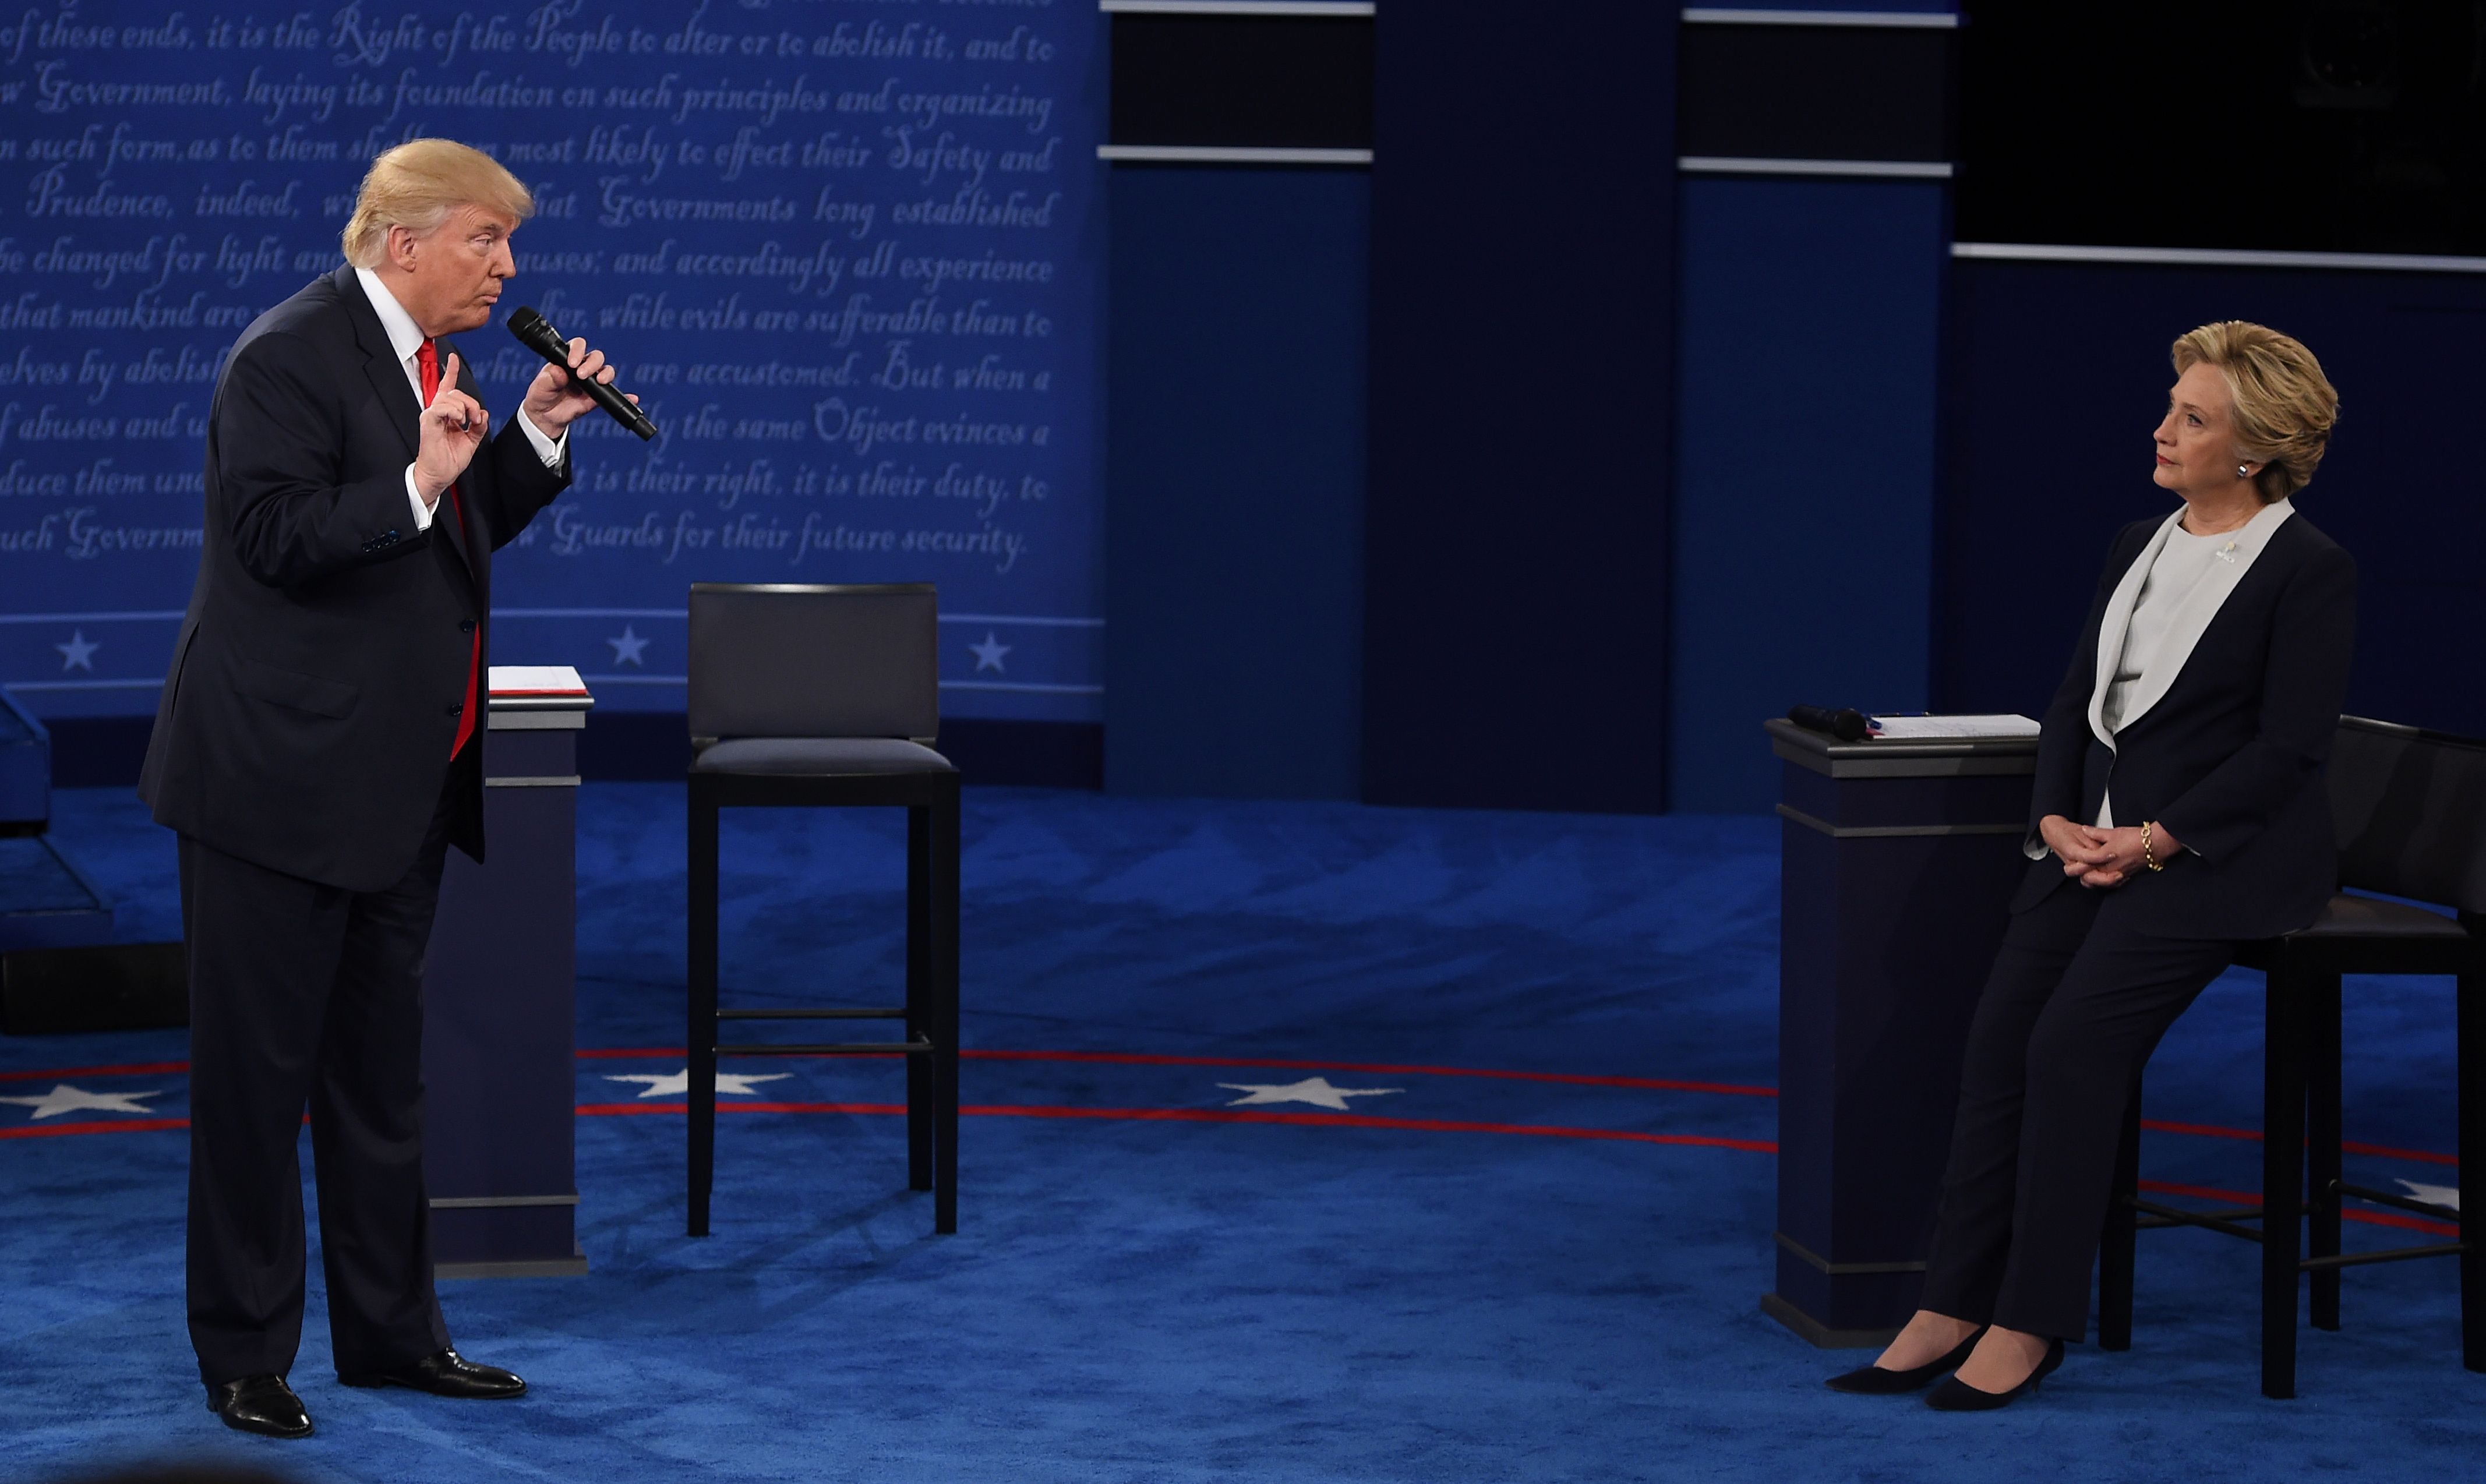 Democratic presidential candidate Hillary Clinton and Republican presidential candidate Donald Trump debate during the second presidential debate at Washington University in St. Louis on Oct. 9, 2016. (Robyn Beck—AFP/Getty Images)